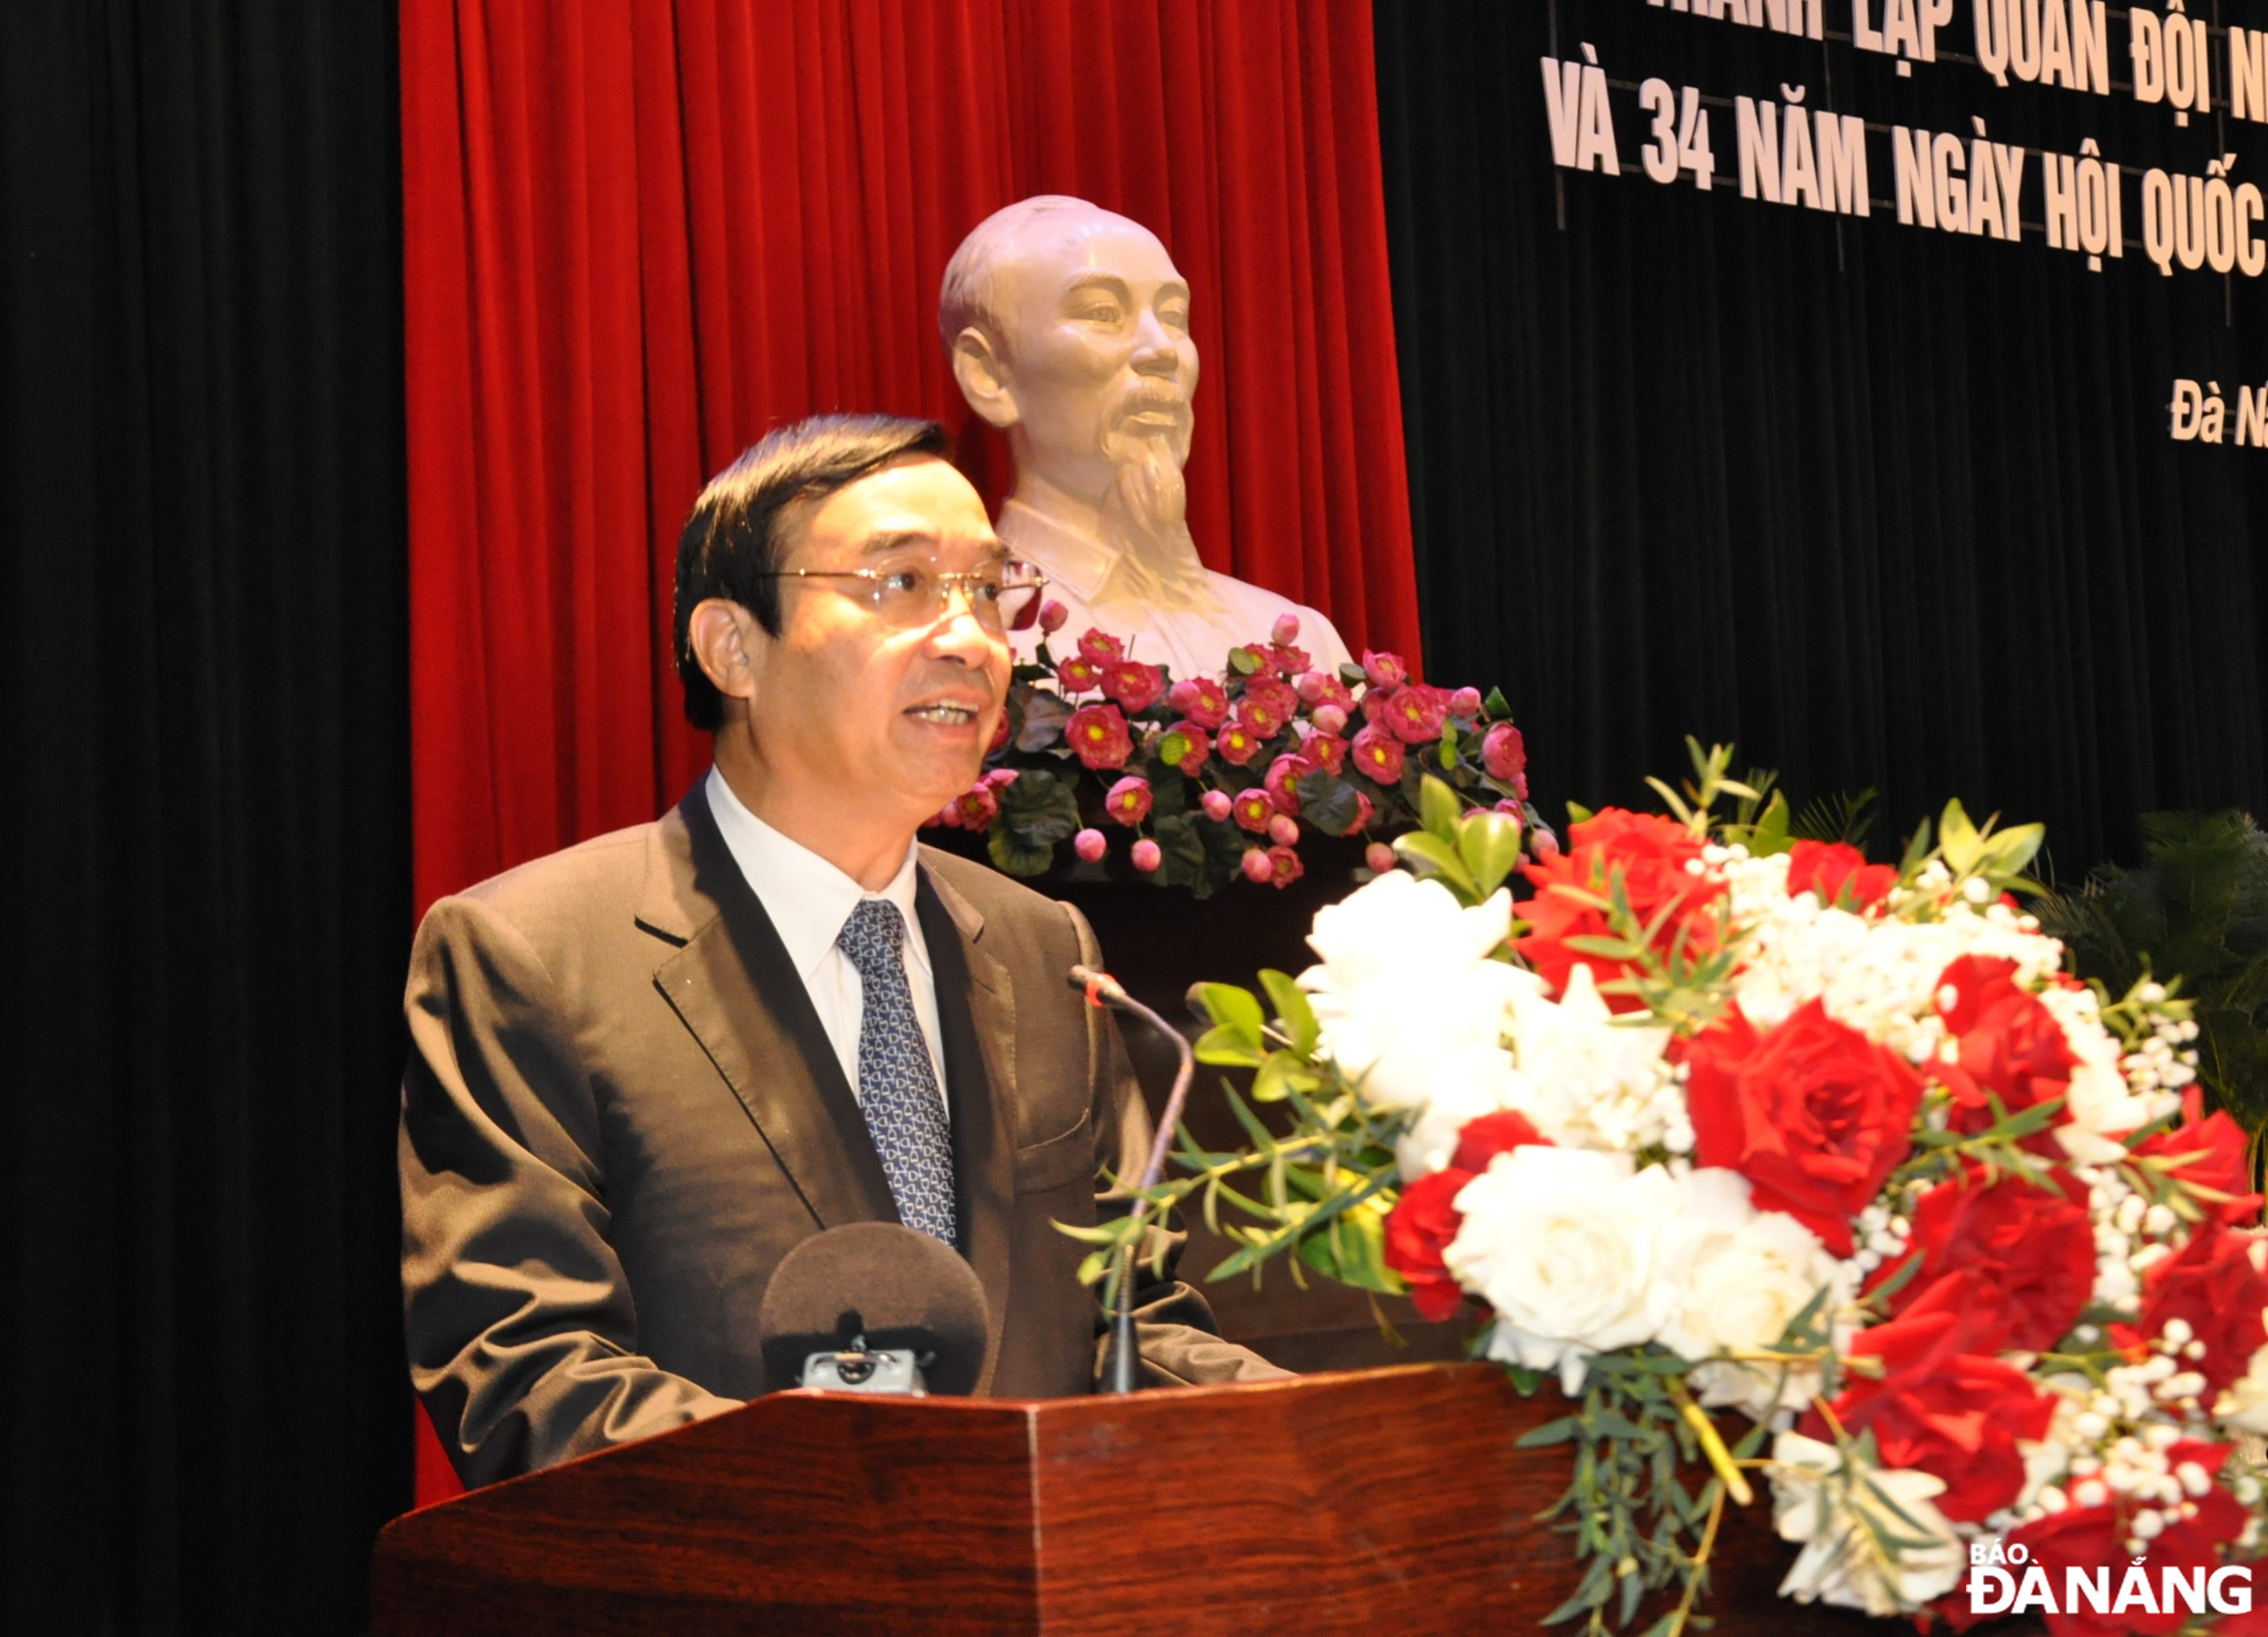 Municipal People’s Committee Chairman Le Trung Chinh speaking at the event